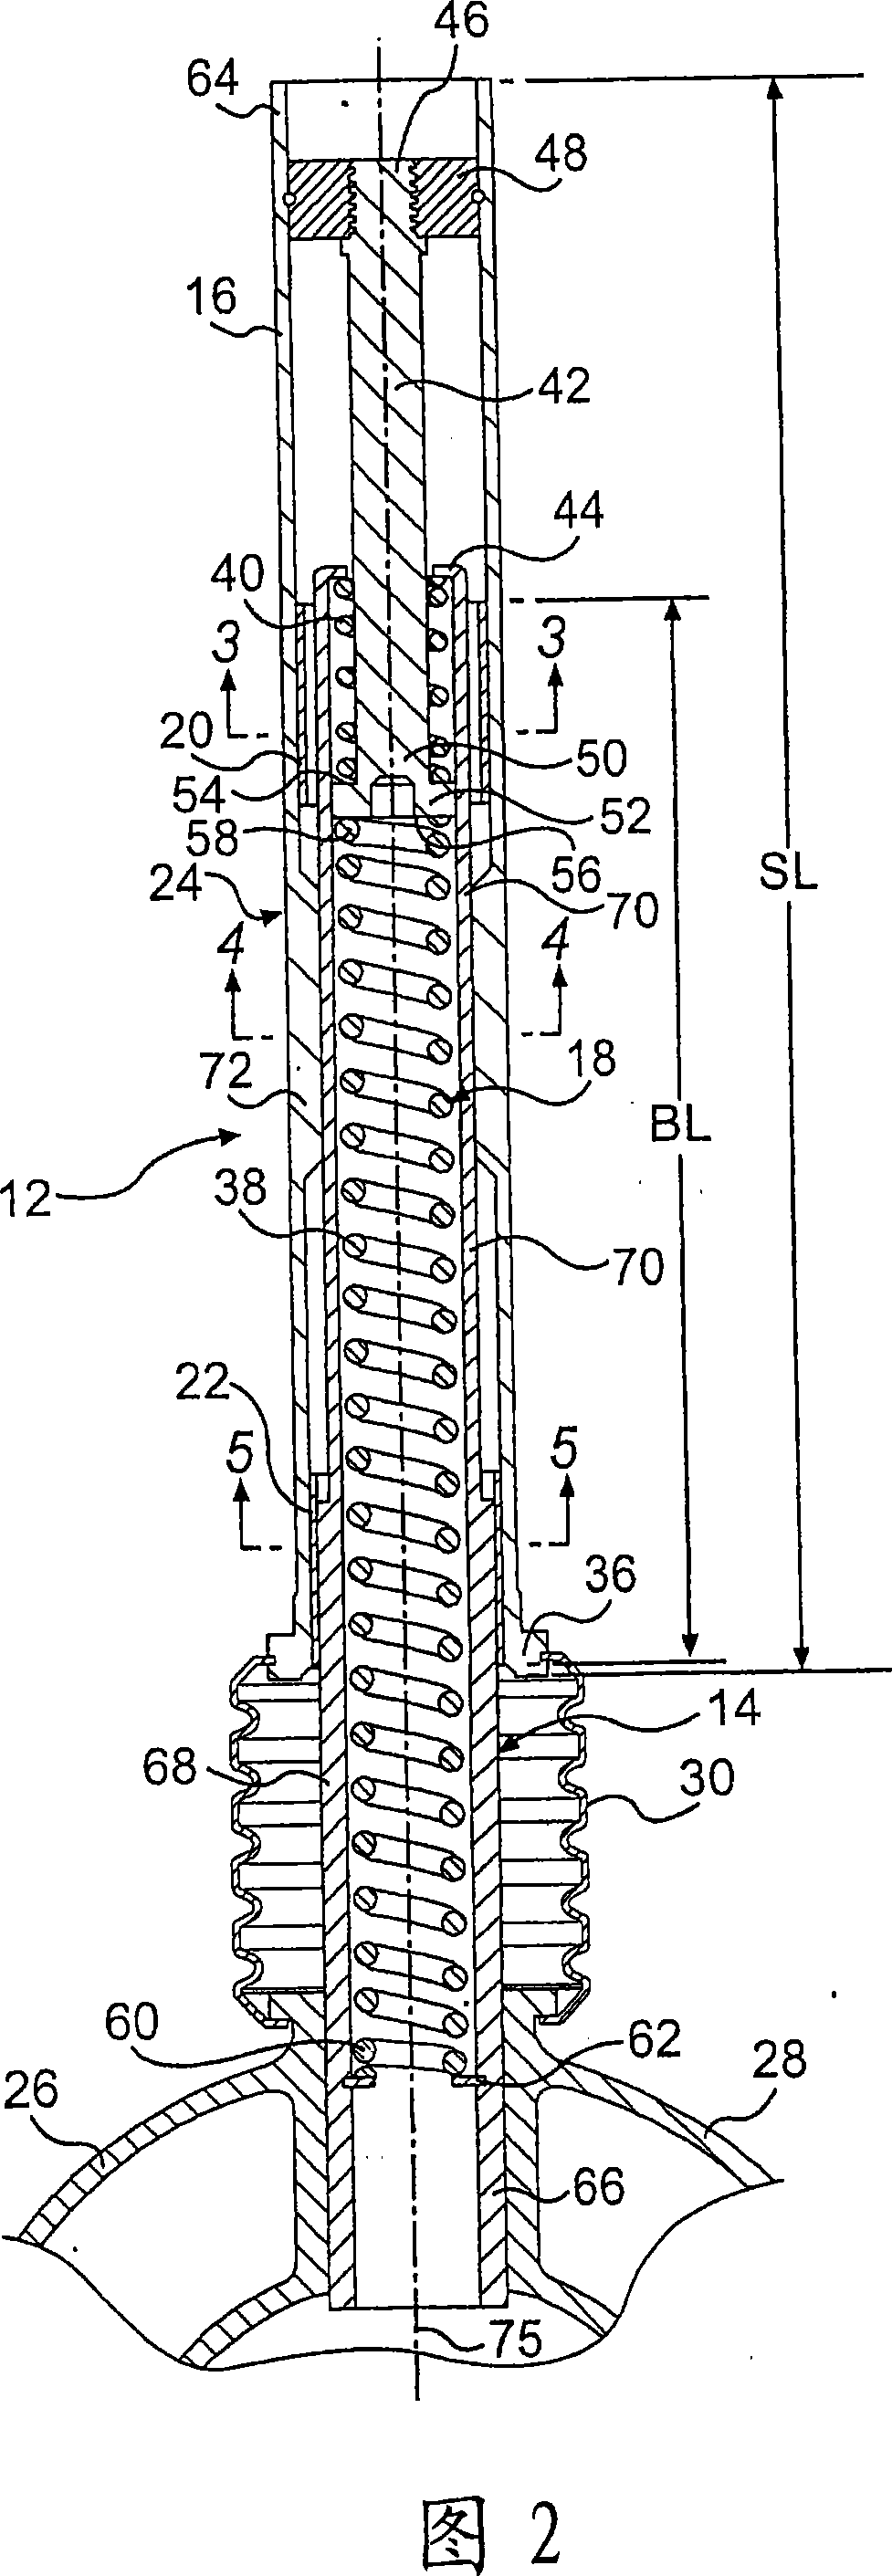 Bicycle suspension system